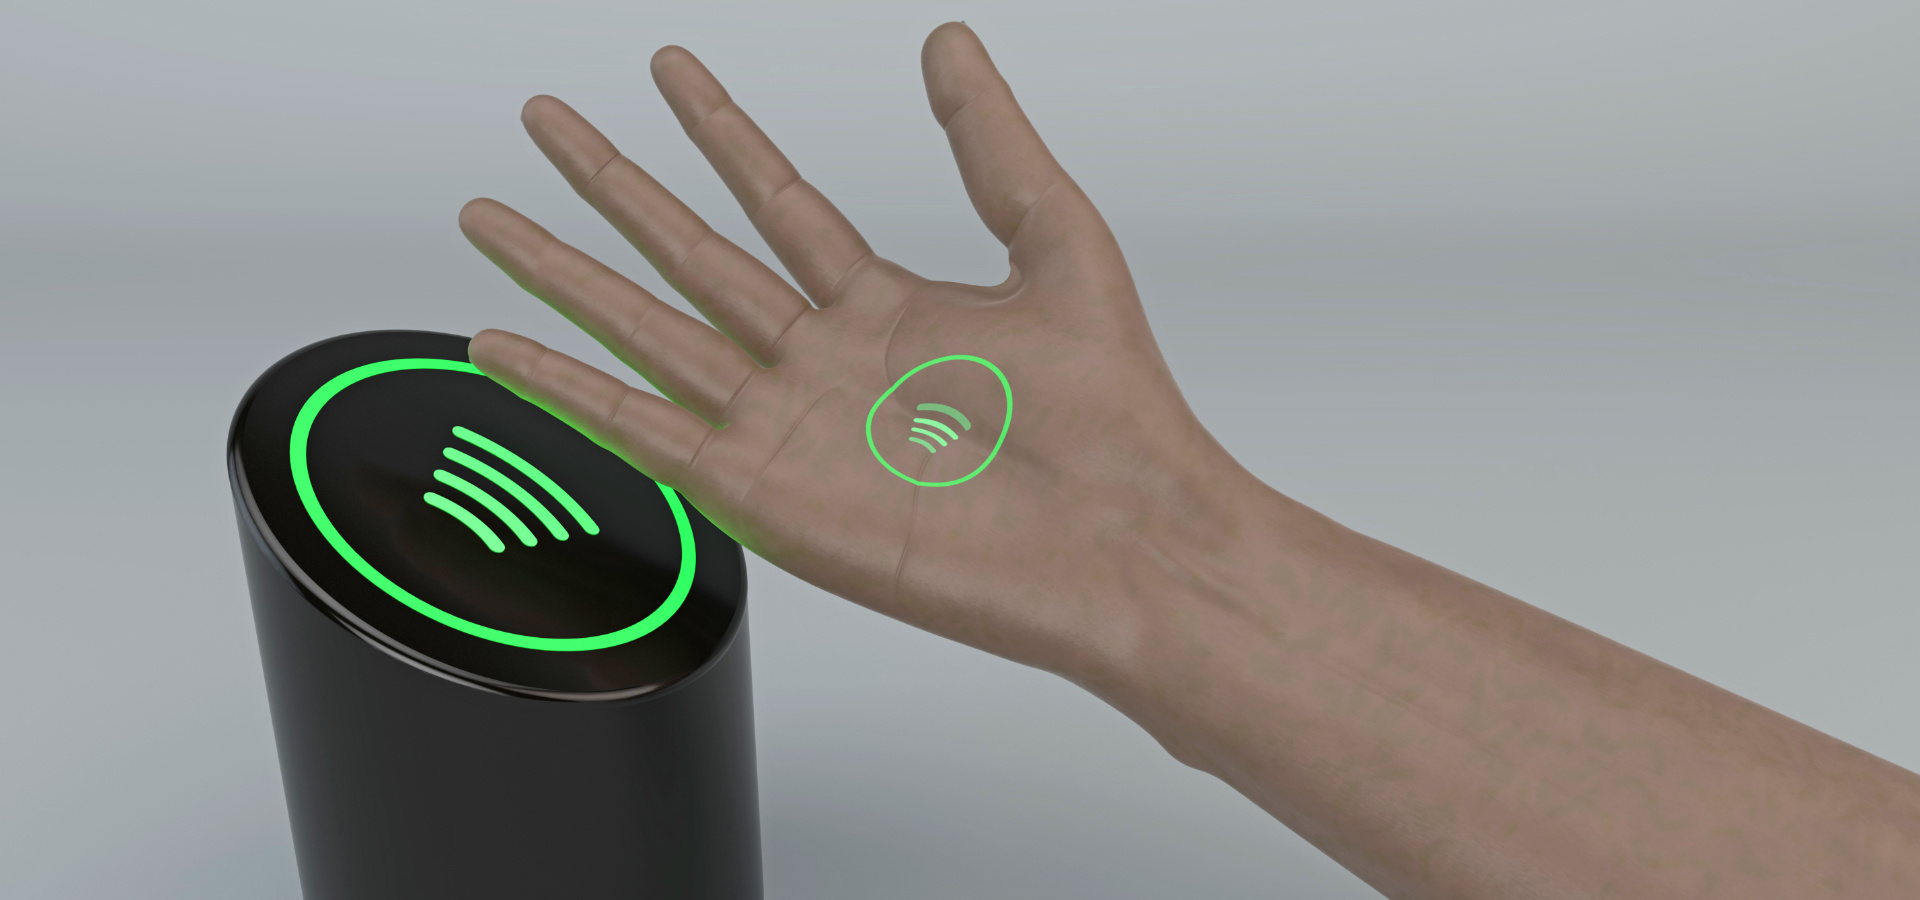 NFC implant in the hand in front of black NFC scanner